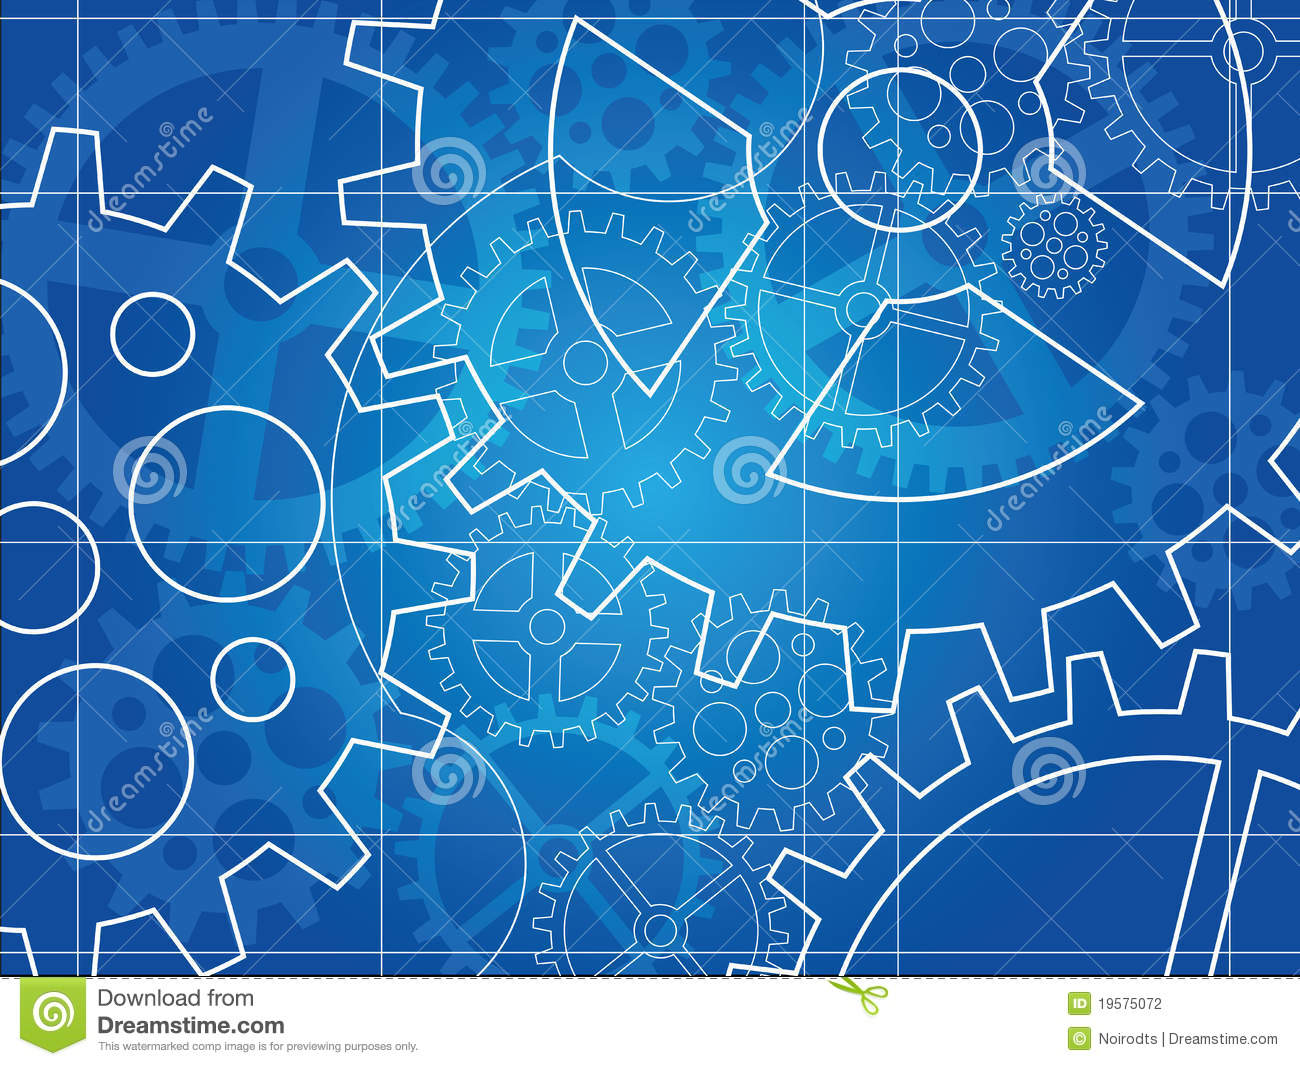 Gear Blueprint Abstract Design Stock Photography   Image  19575072